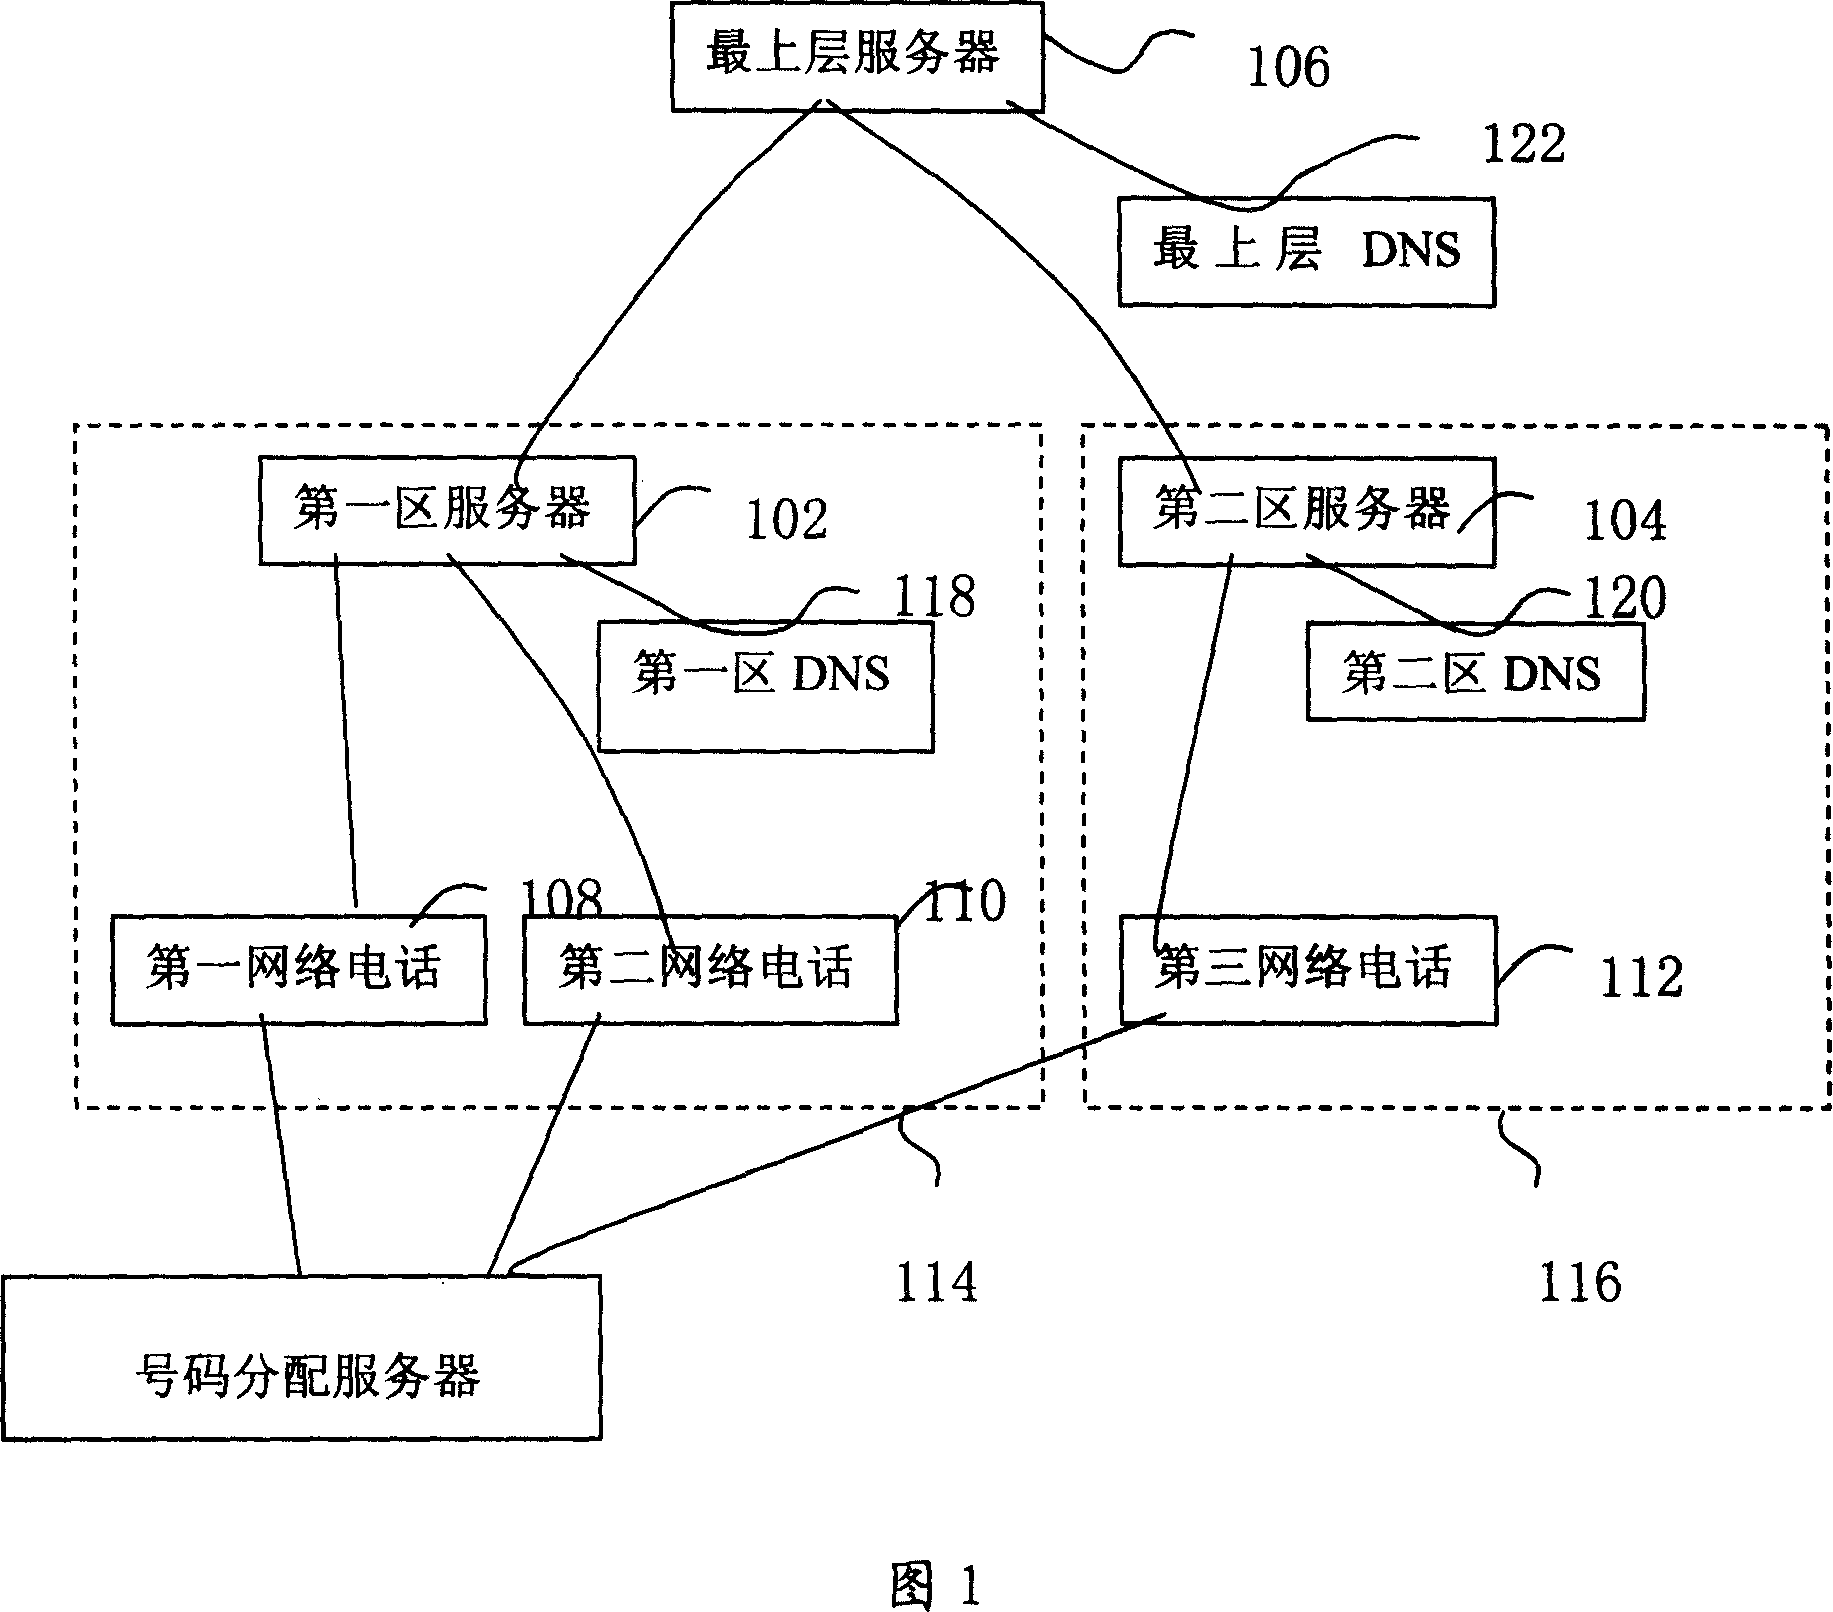 Network telephone system and network telephone point-to-point online method